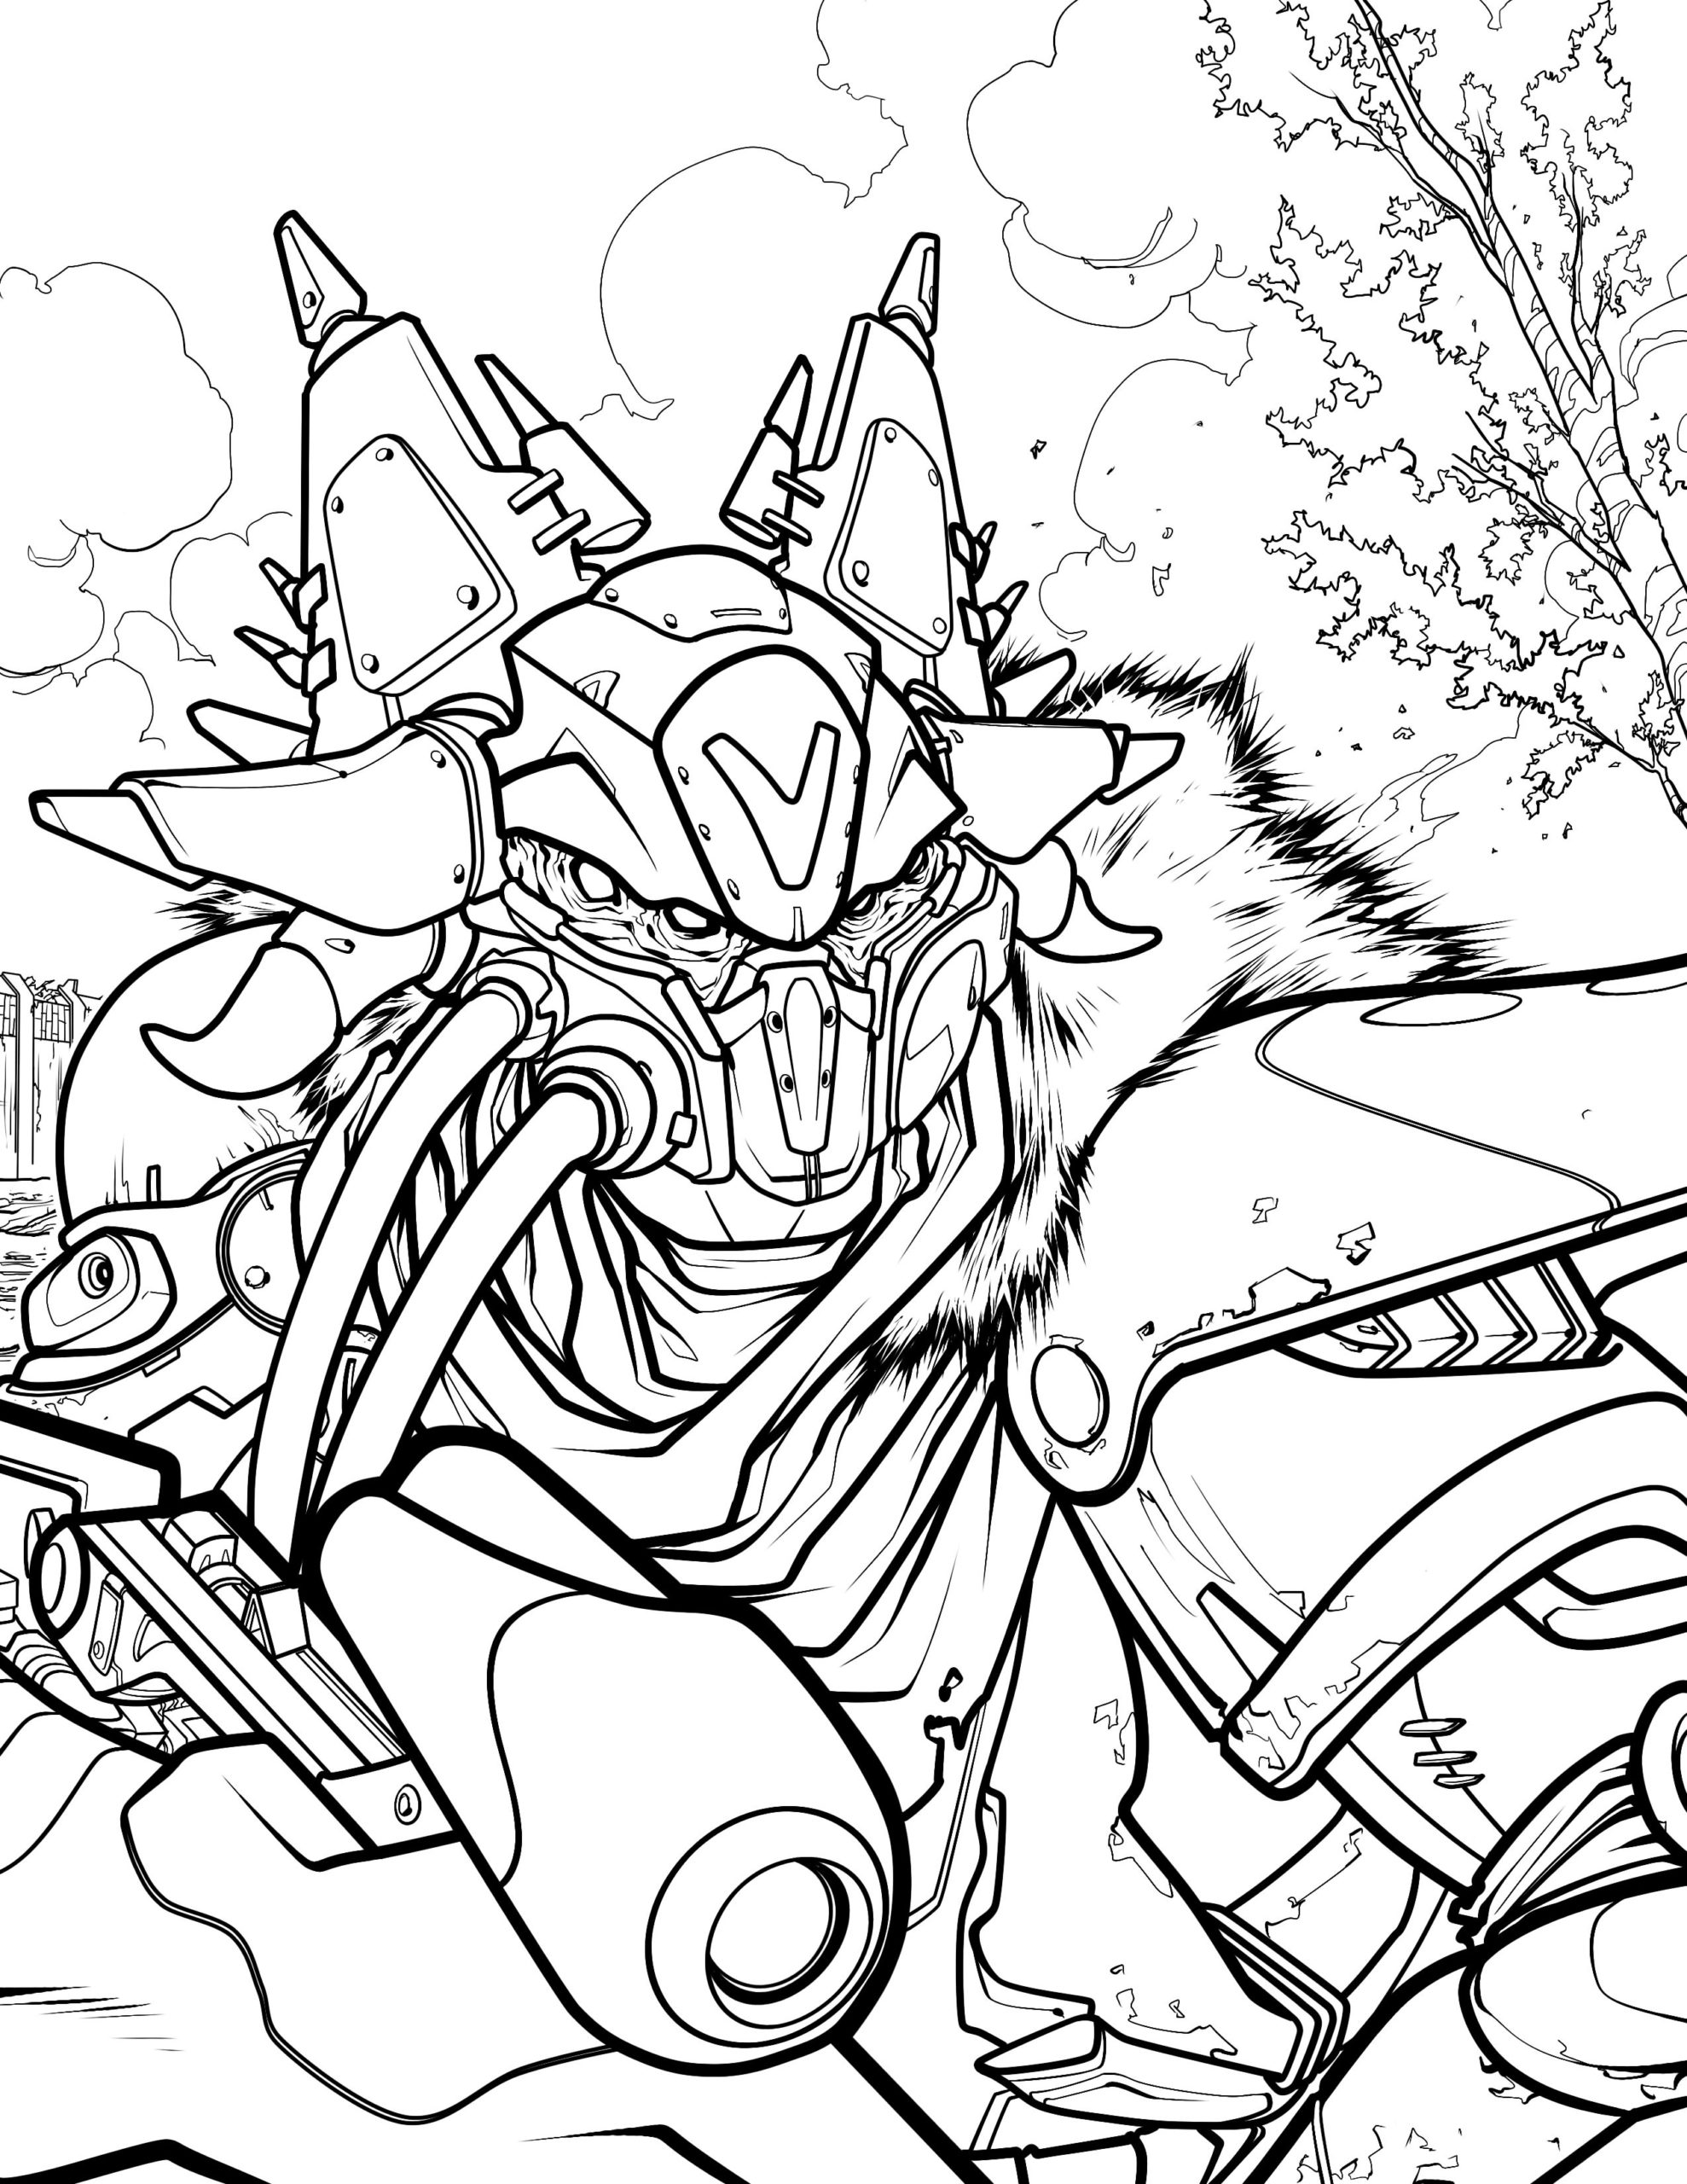 Official Destiny Colouring Book Looks More Relaxing Than Destiny